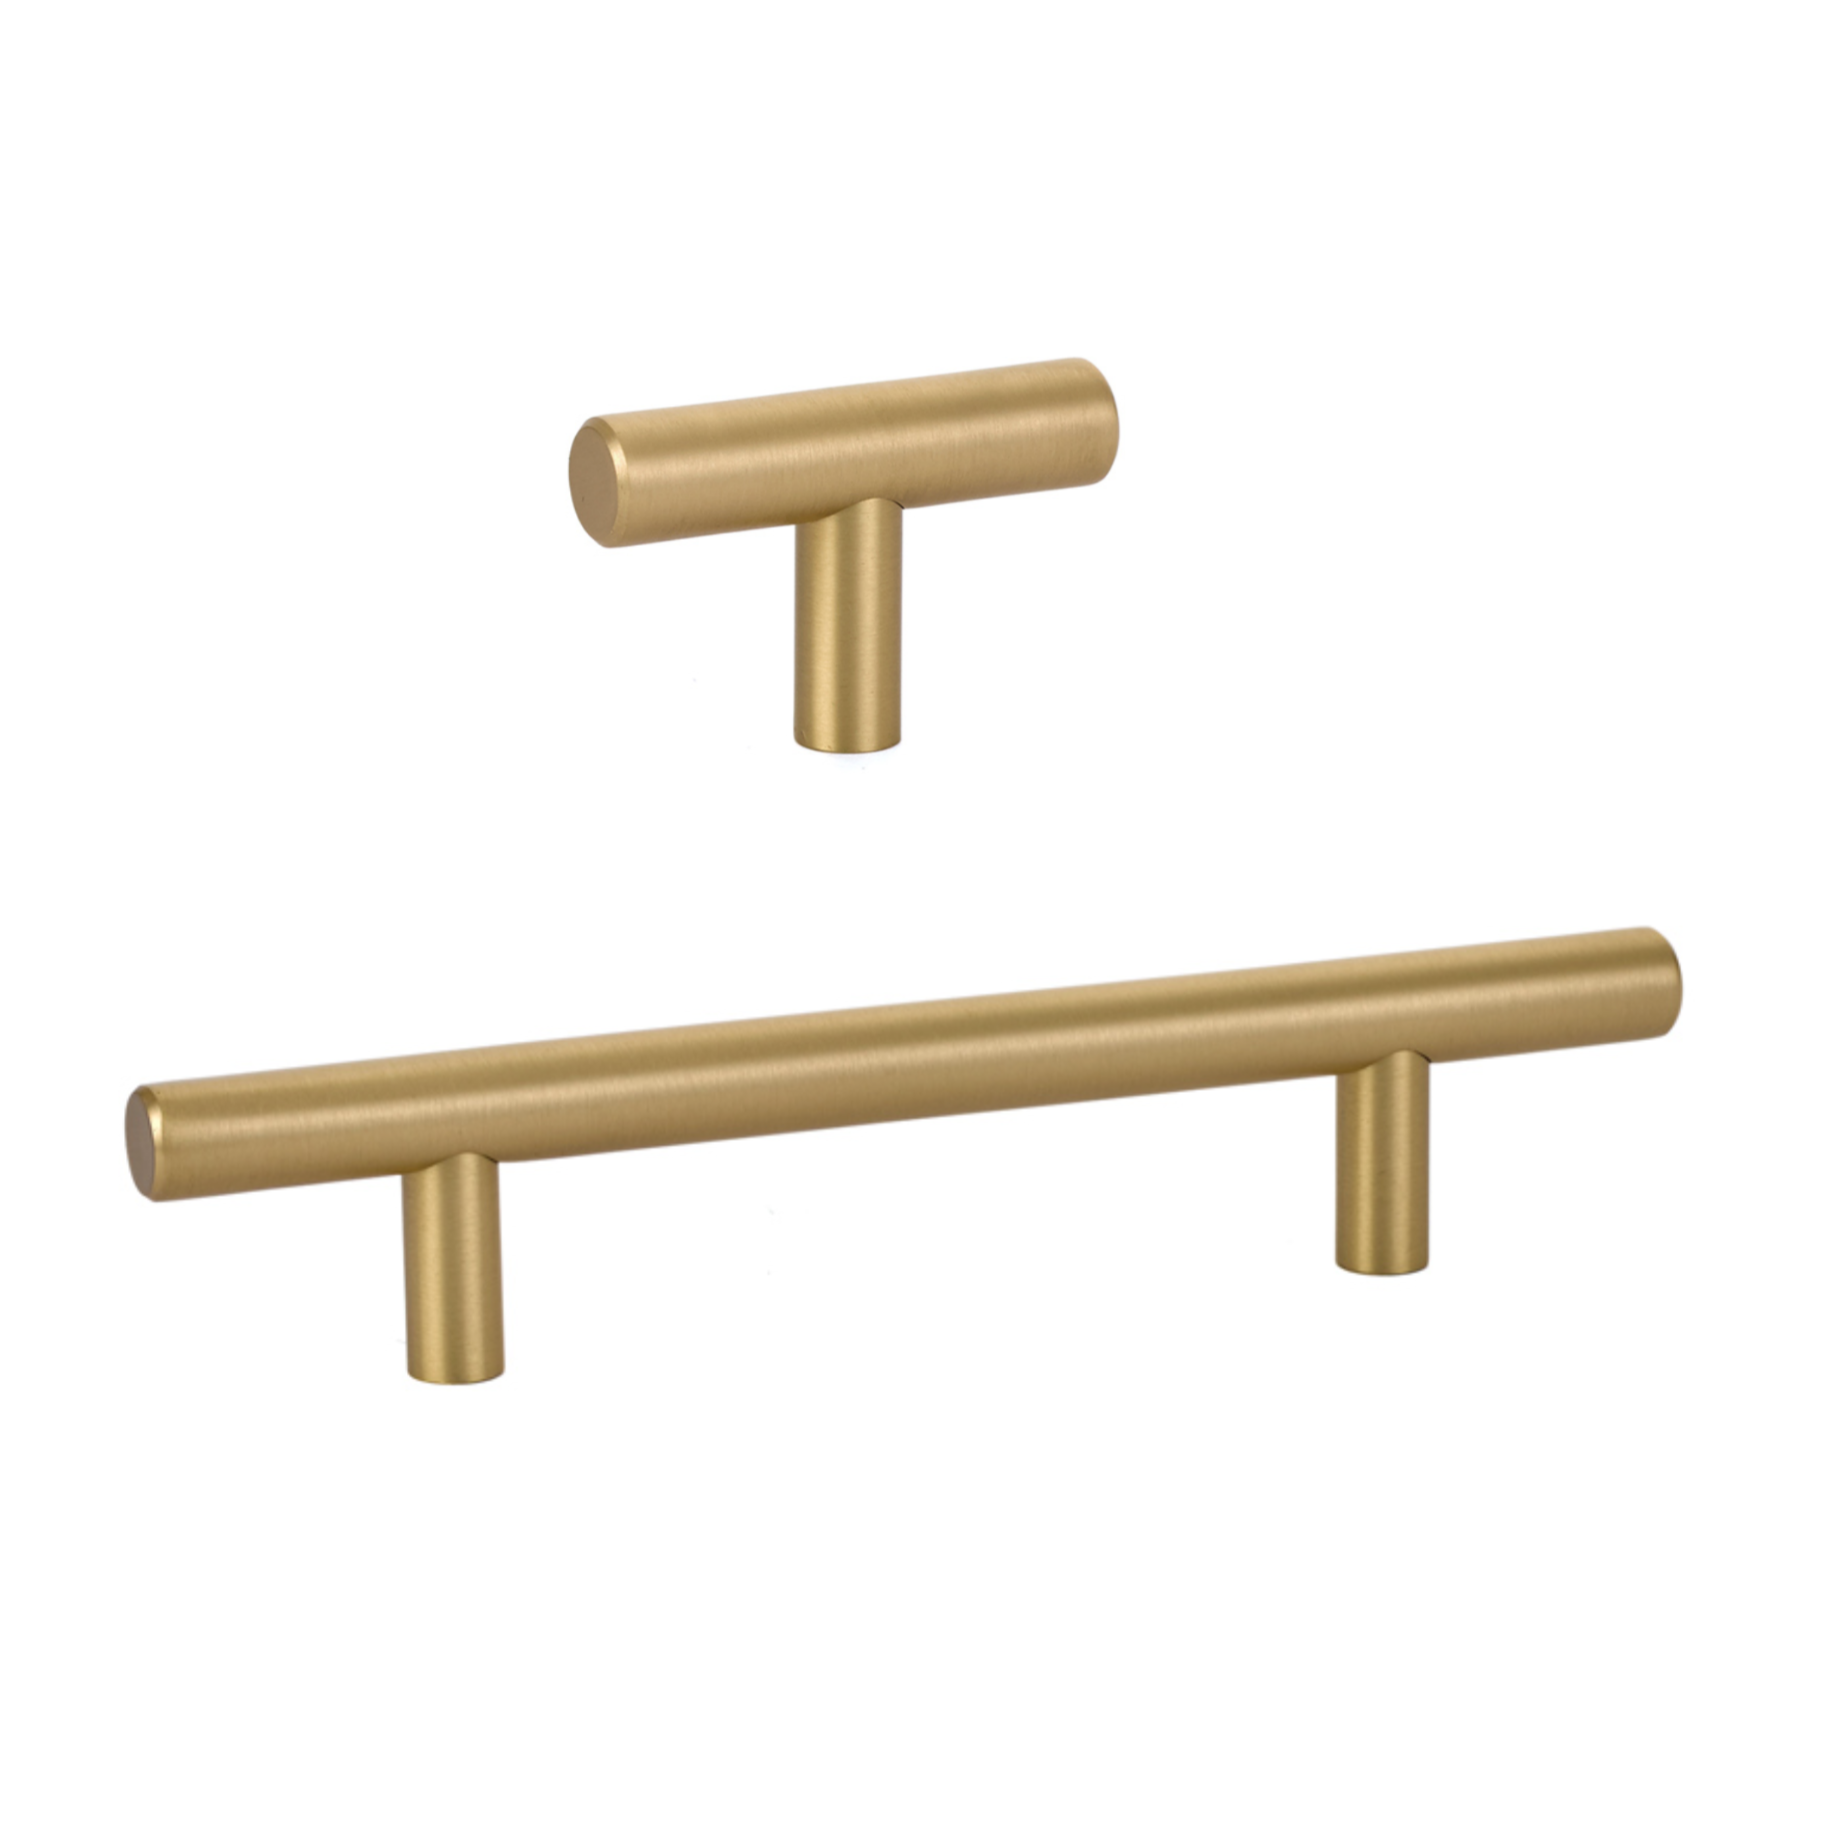 T-Bar "European" Satin Brass Cabinet Knobs and Pulls - Industry Hardware